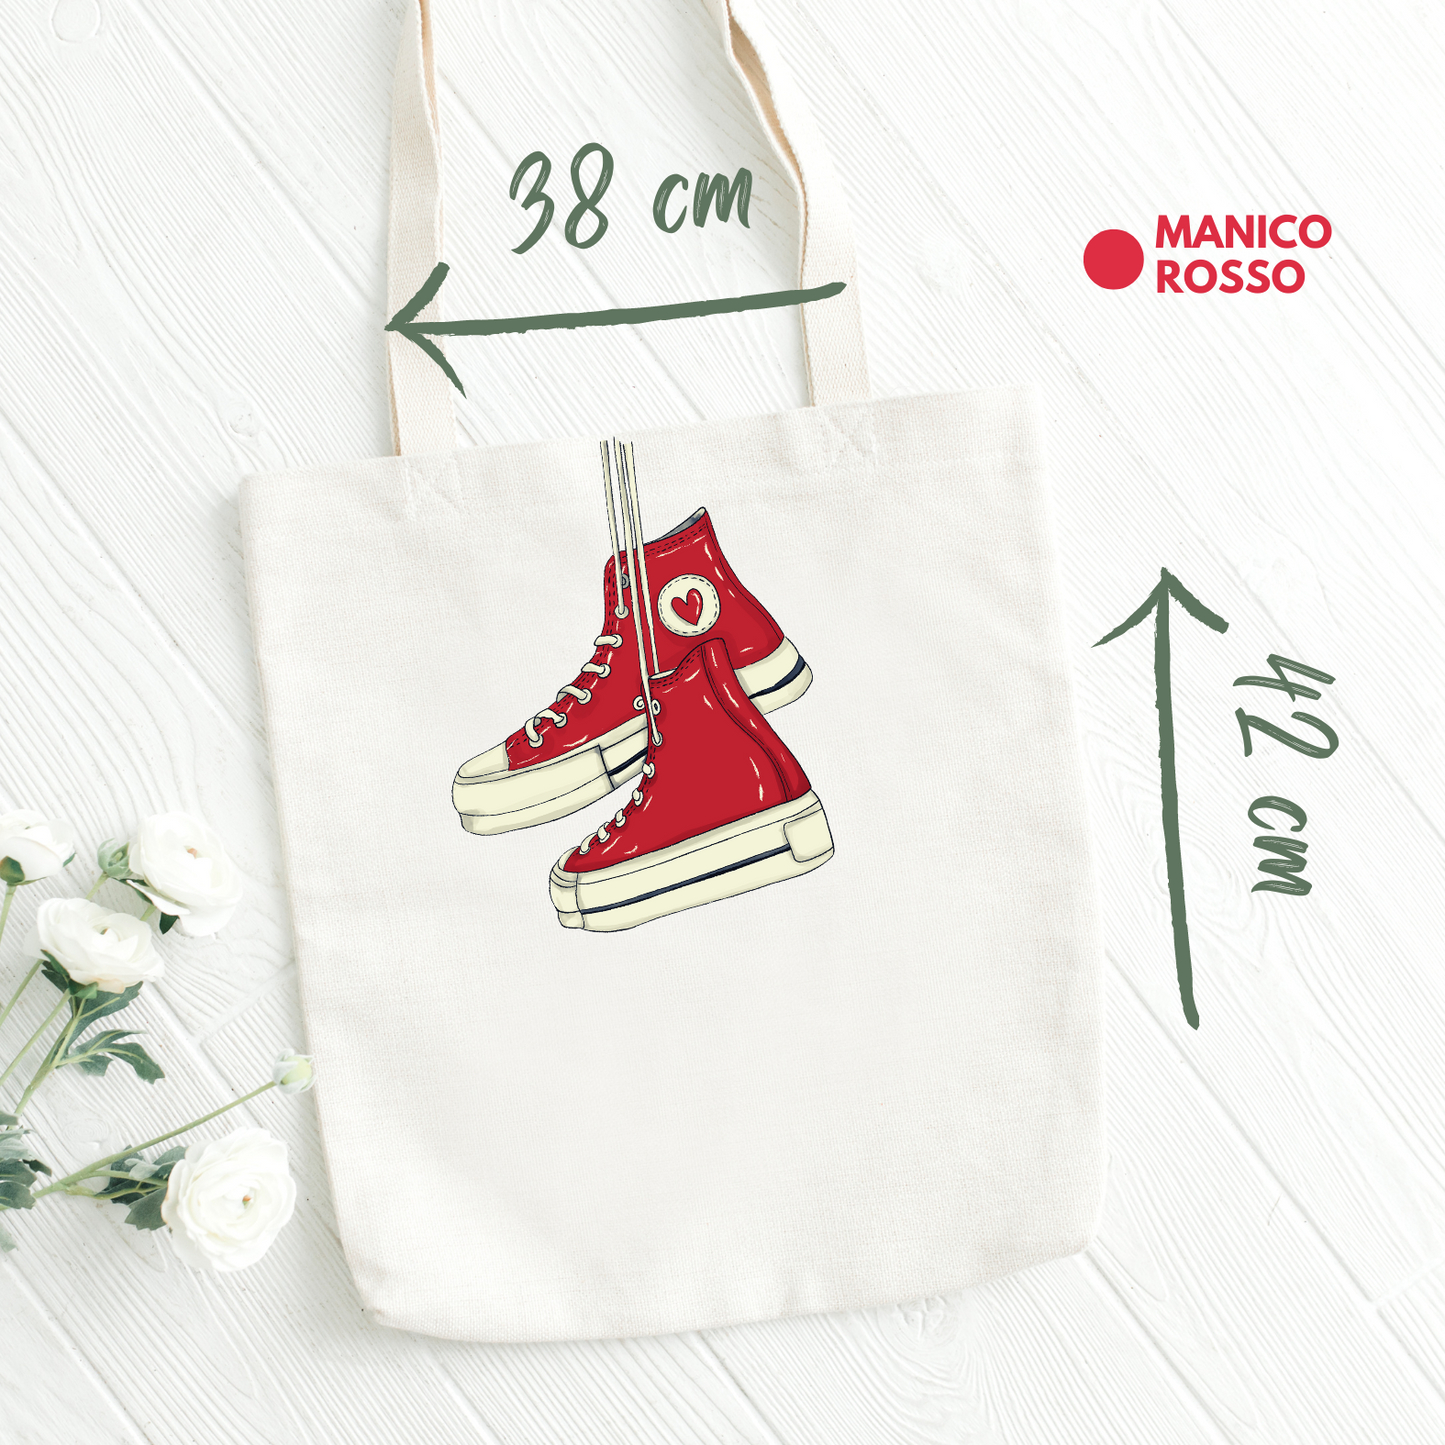 Shopping bag aesthetic 100% cotone naturale | Mod. Sneakers